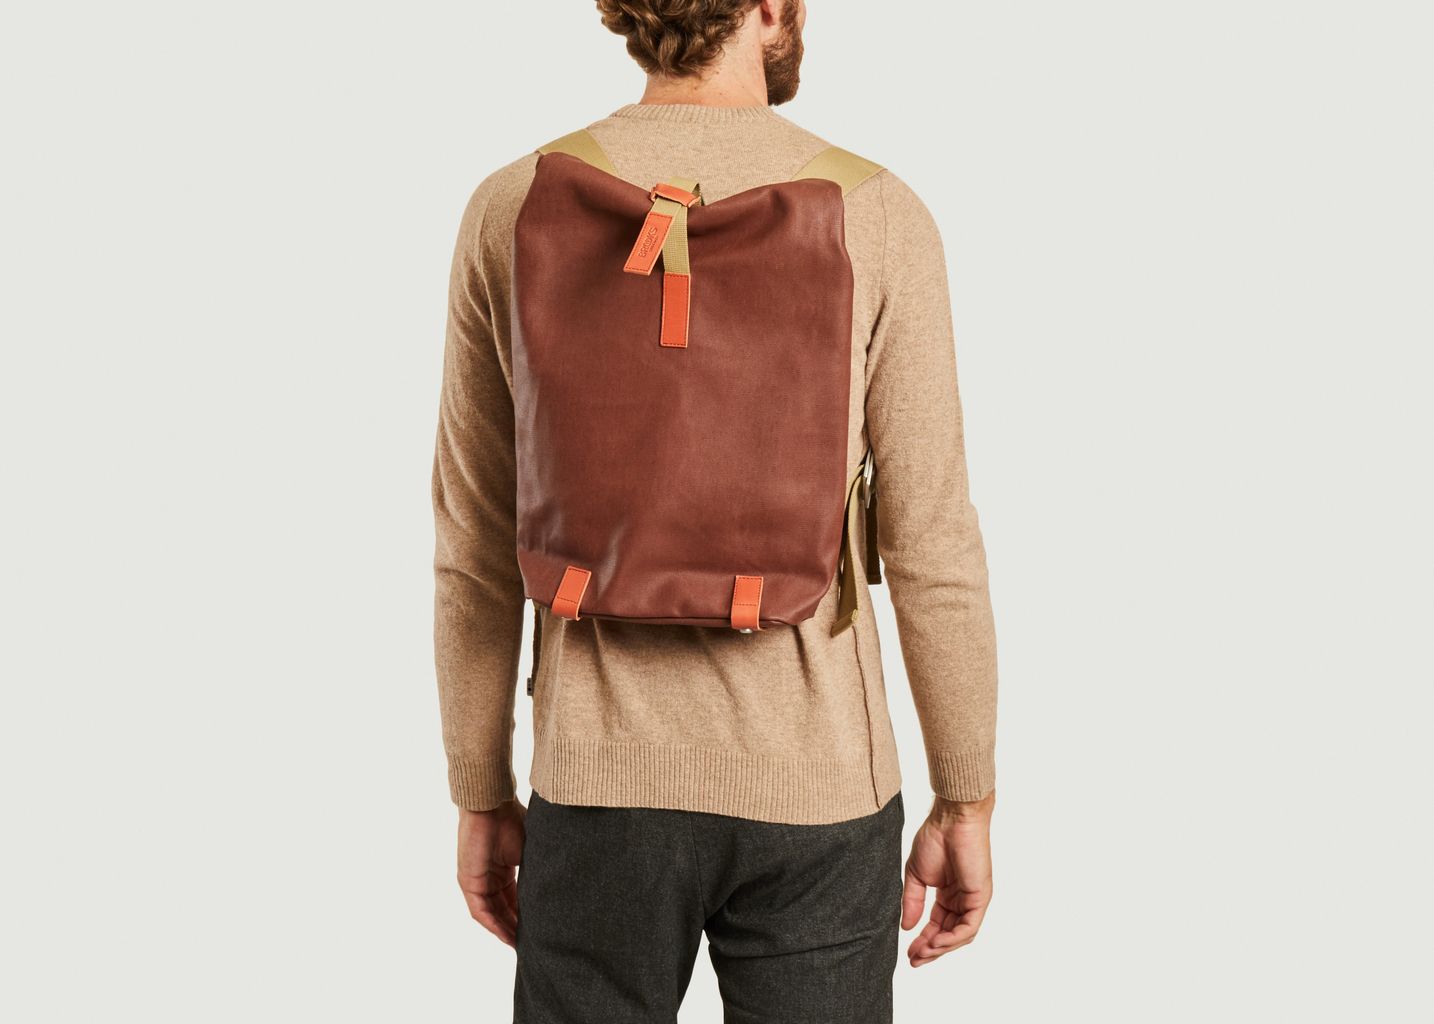 Pickwick cotton backpack 12 L  - Brooks England